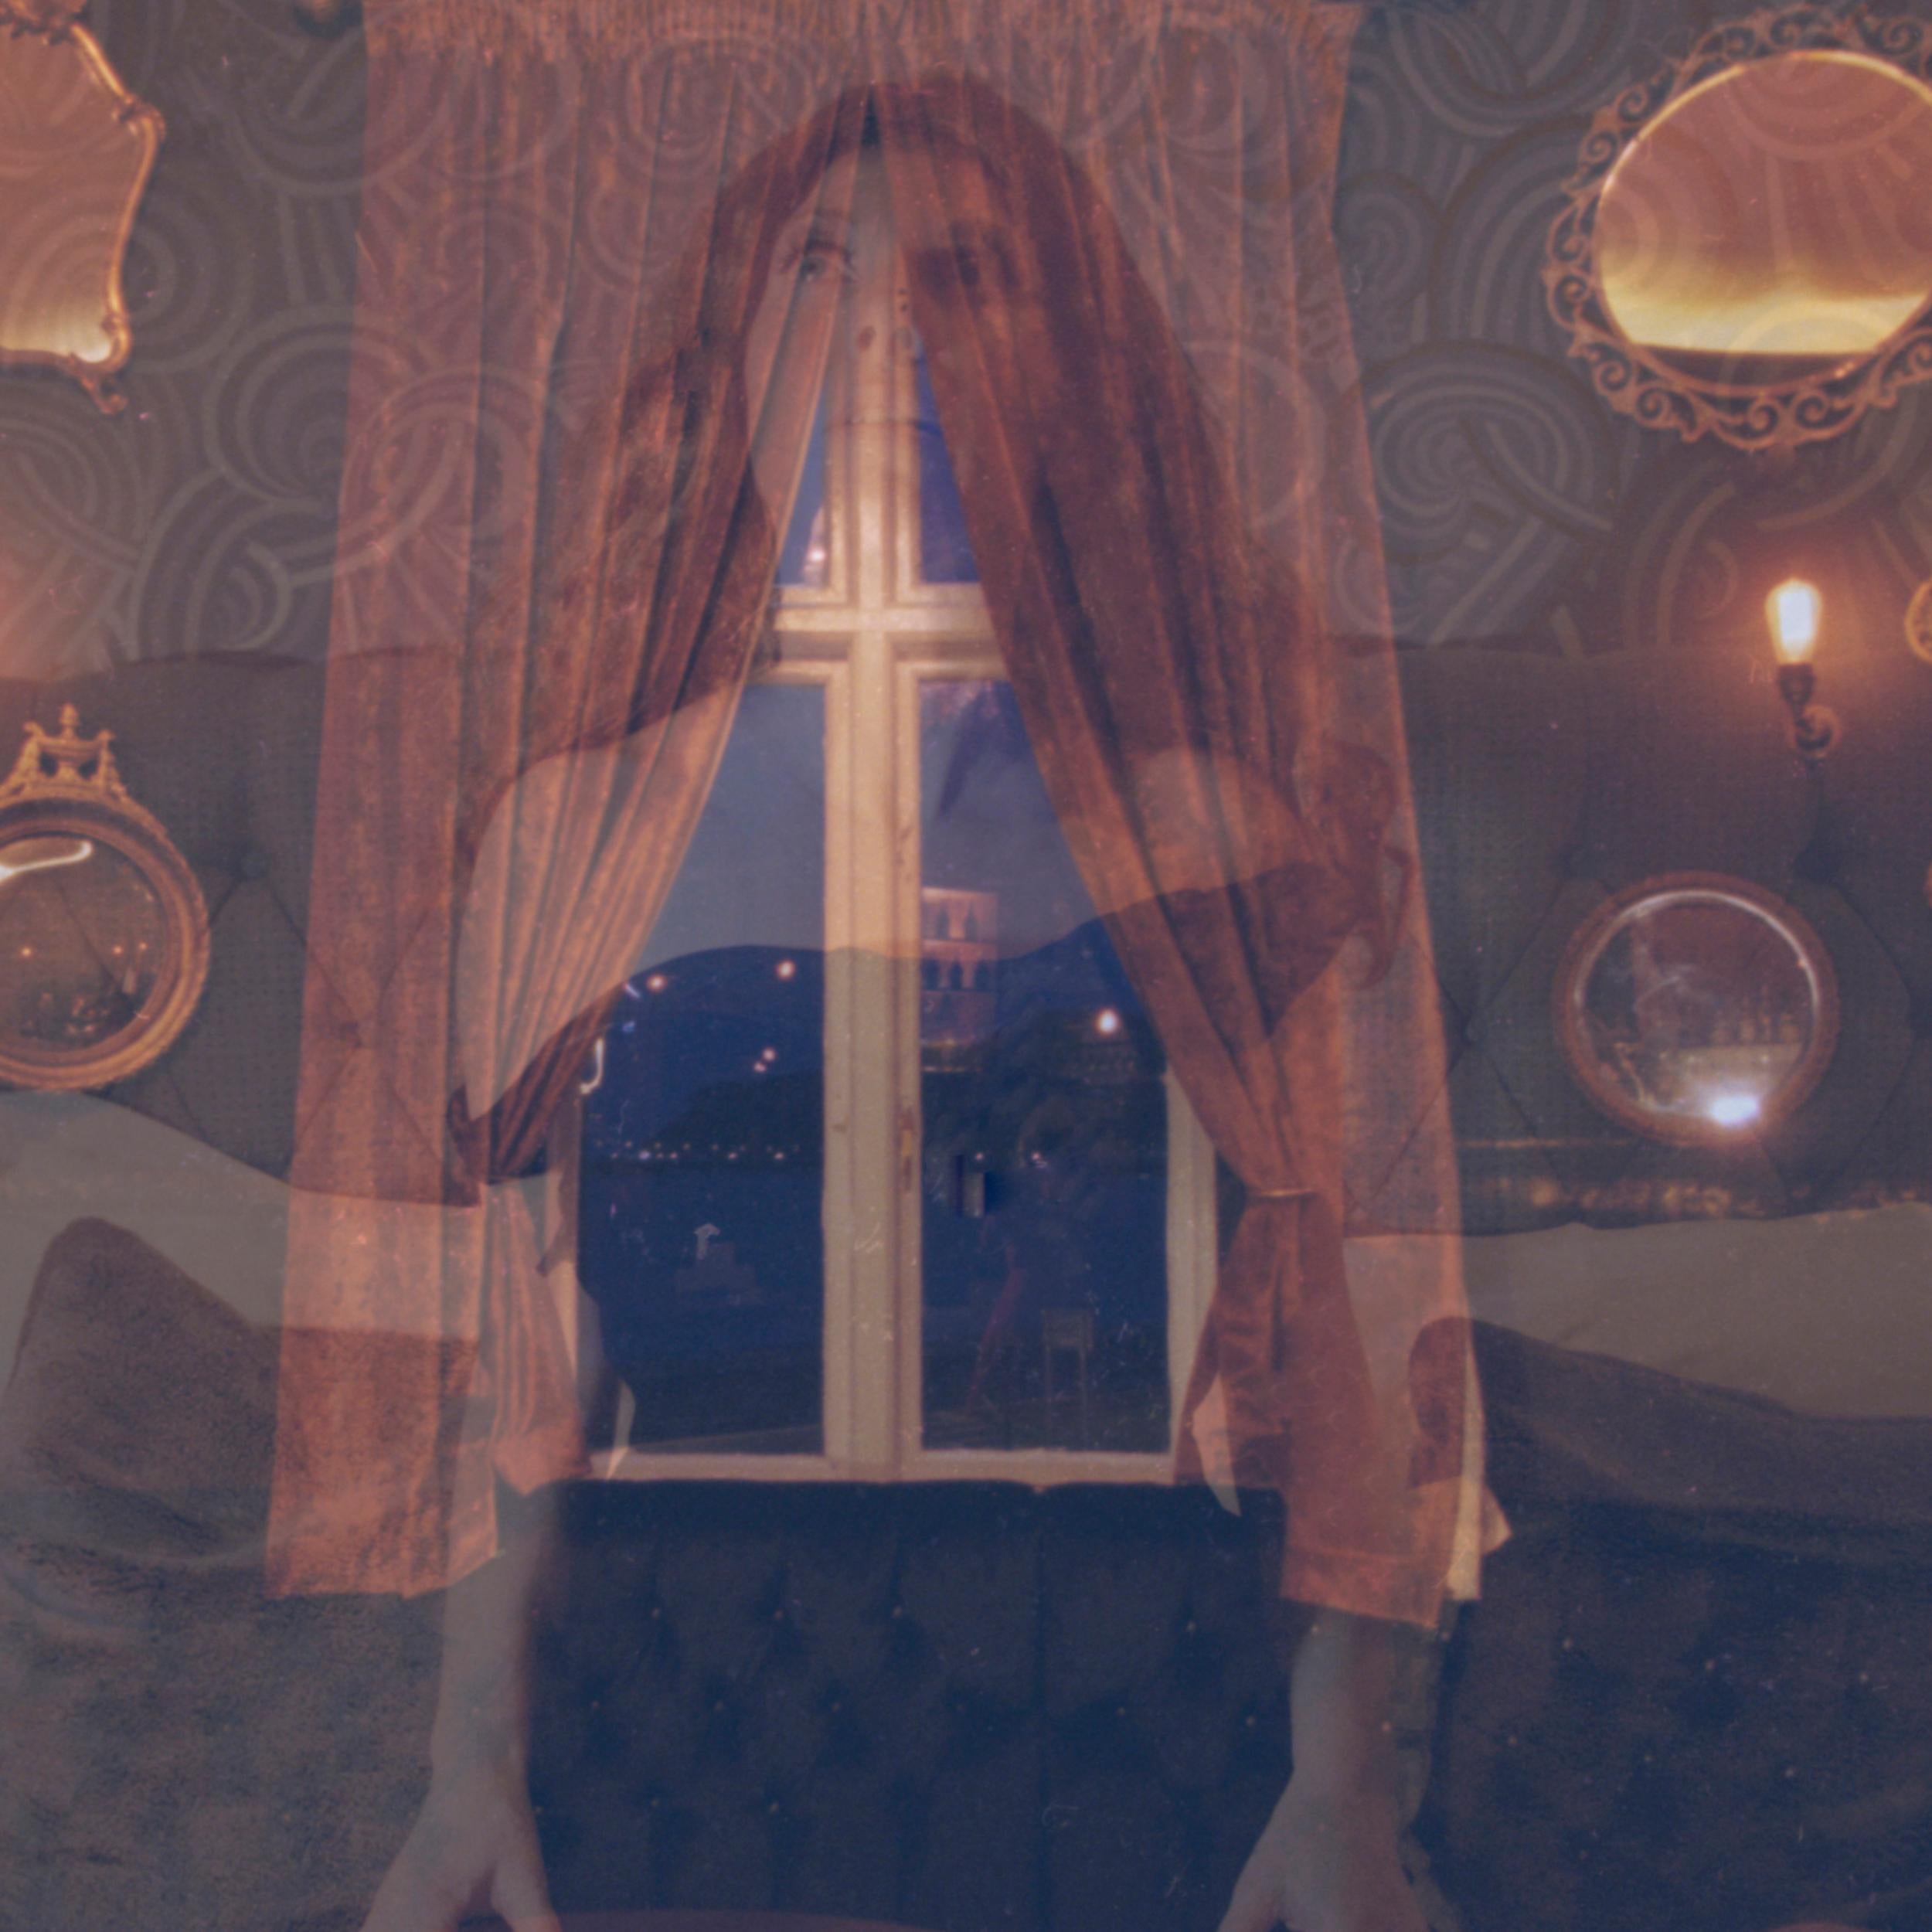 Visions at the Mirrored Palace - Contemporary, Polaroid, Frau, Psychiatrie